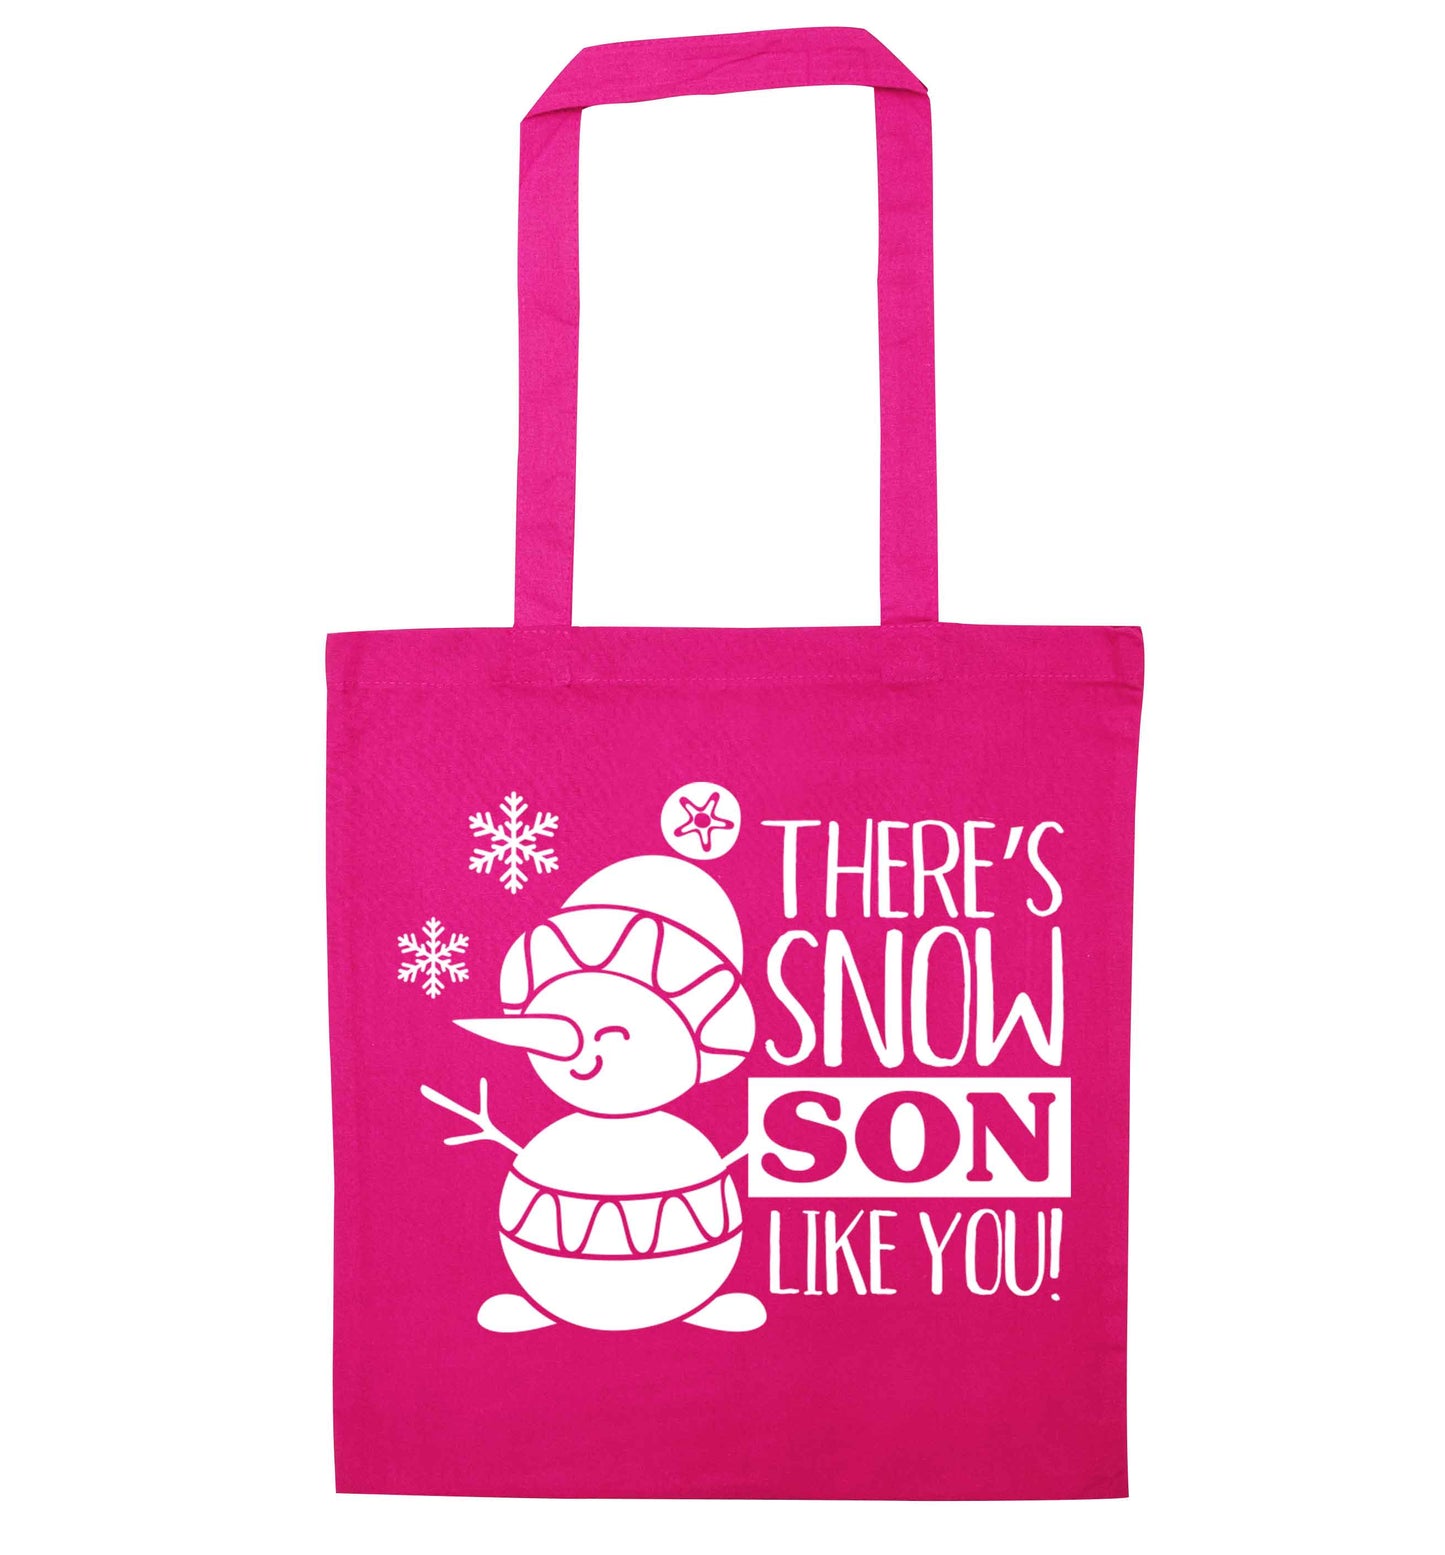 There's snow son like you pink tote bag